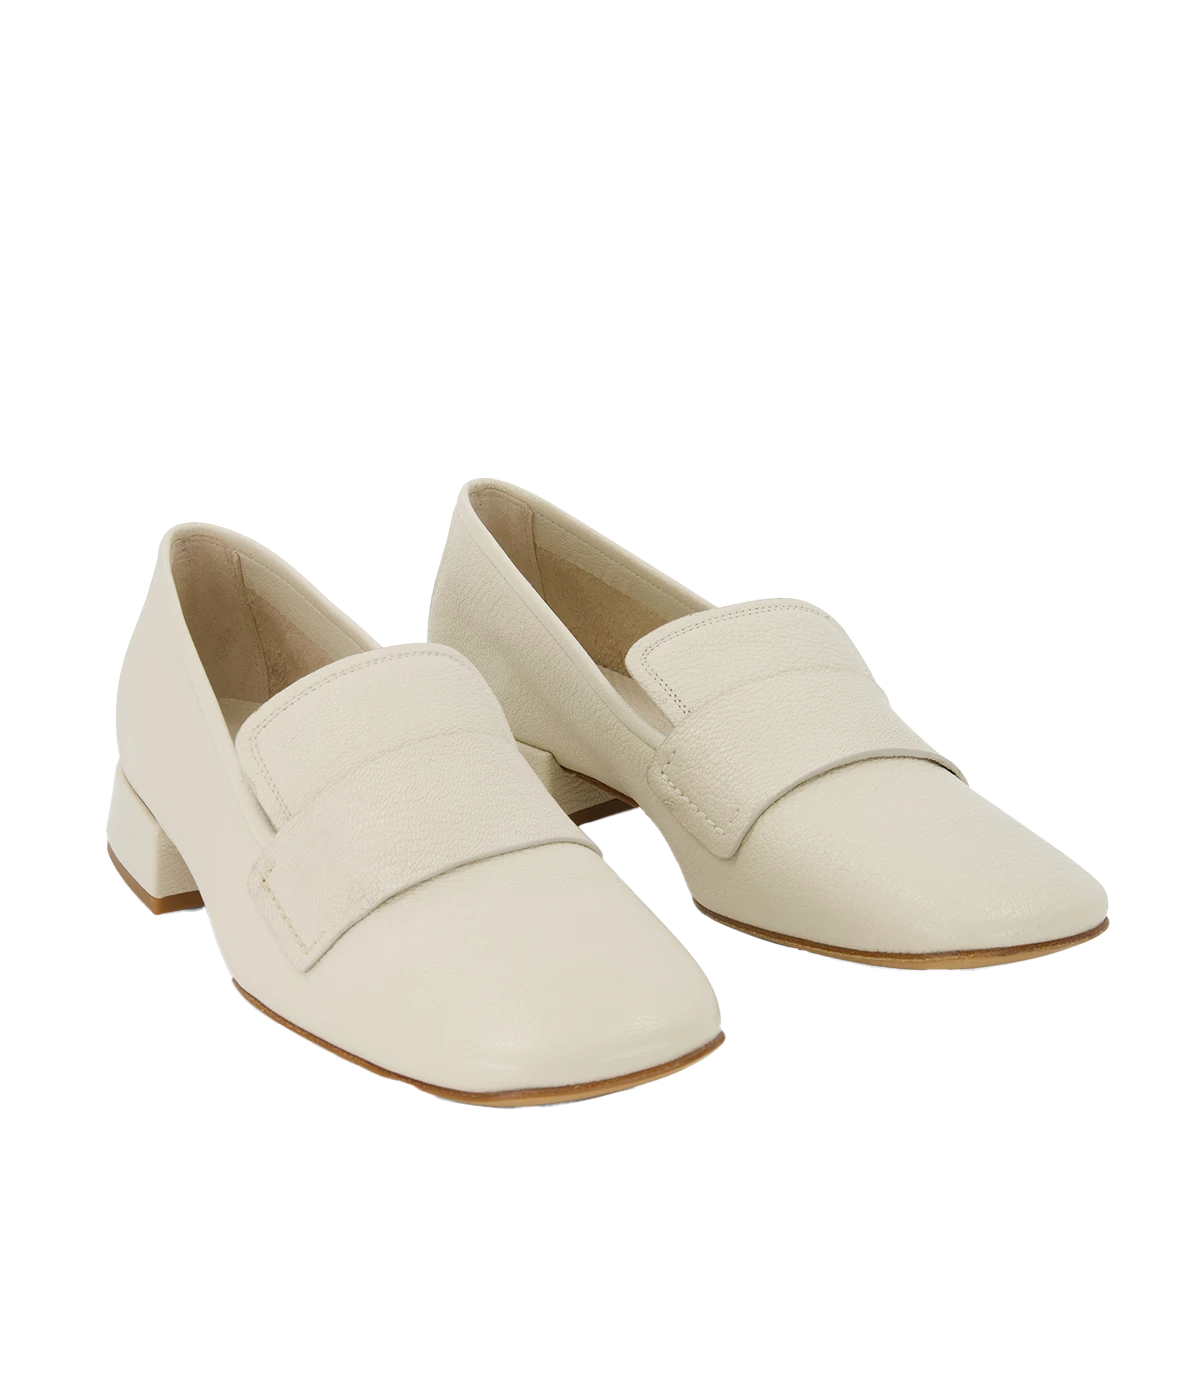 Galit Loafer in Ivory